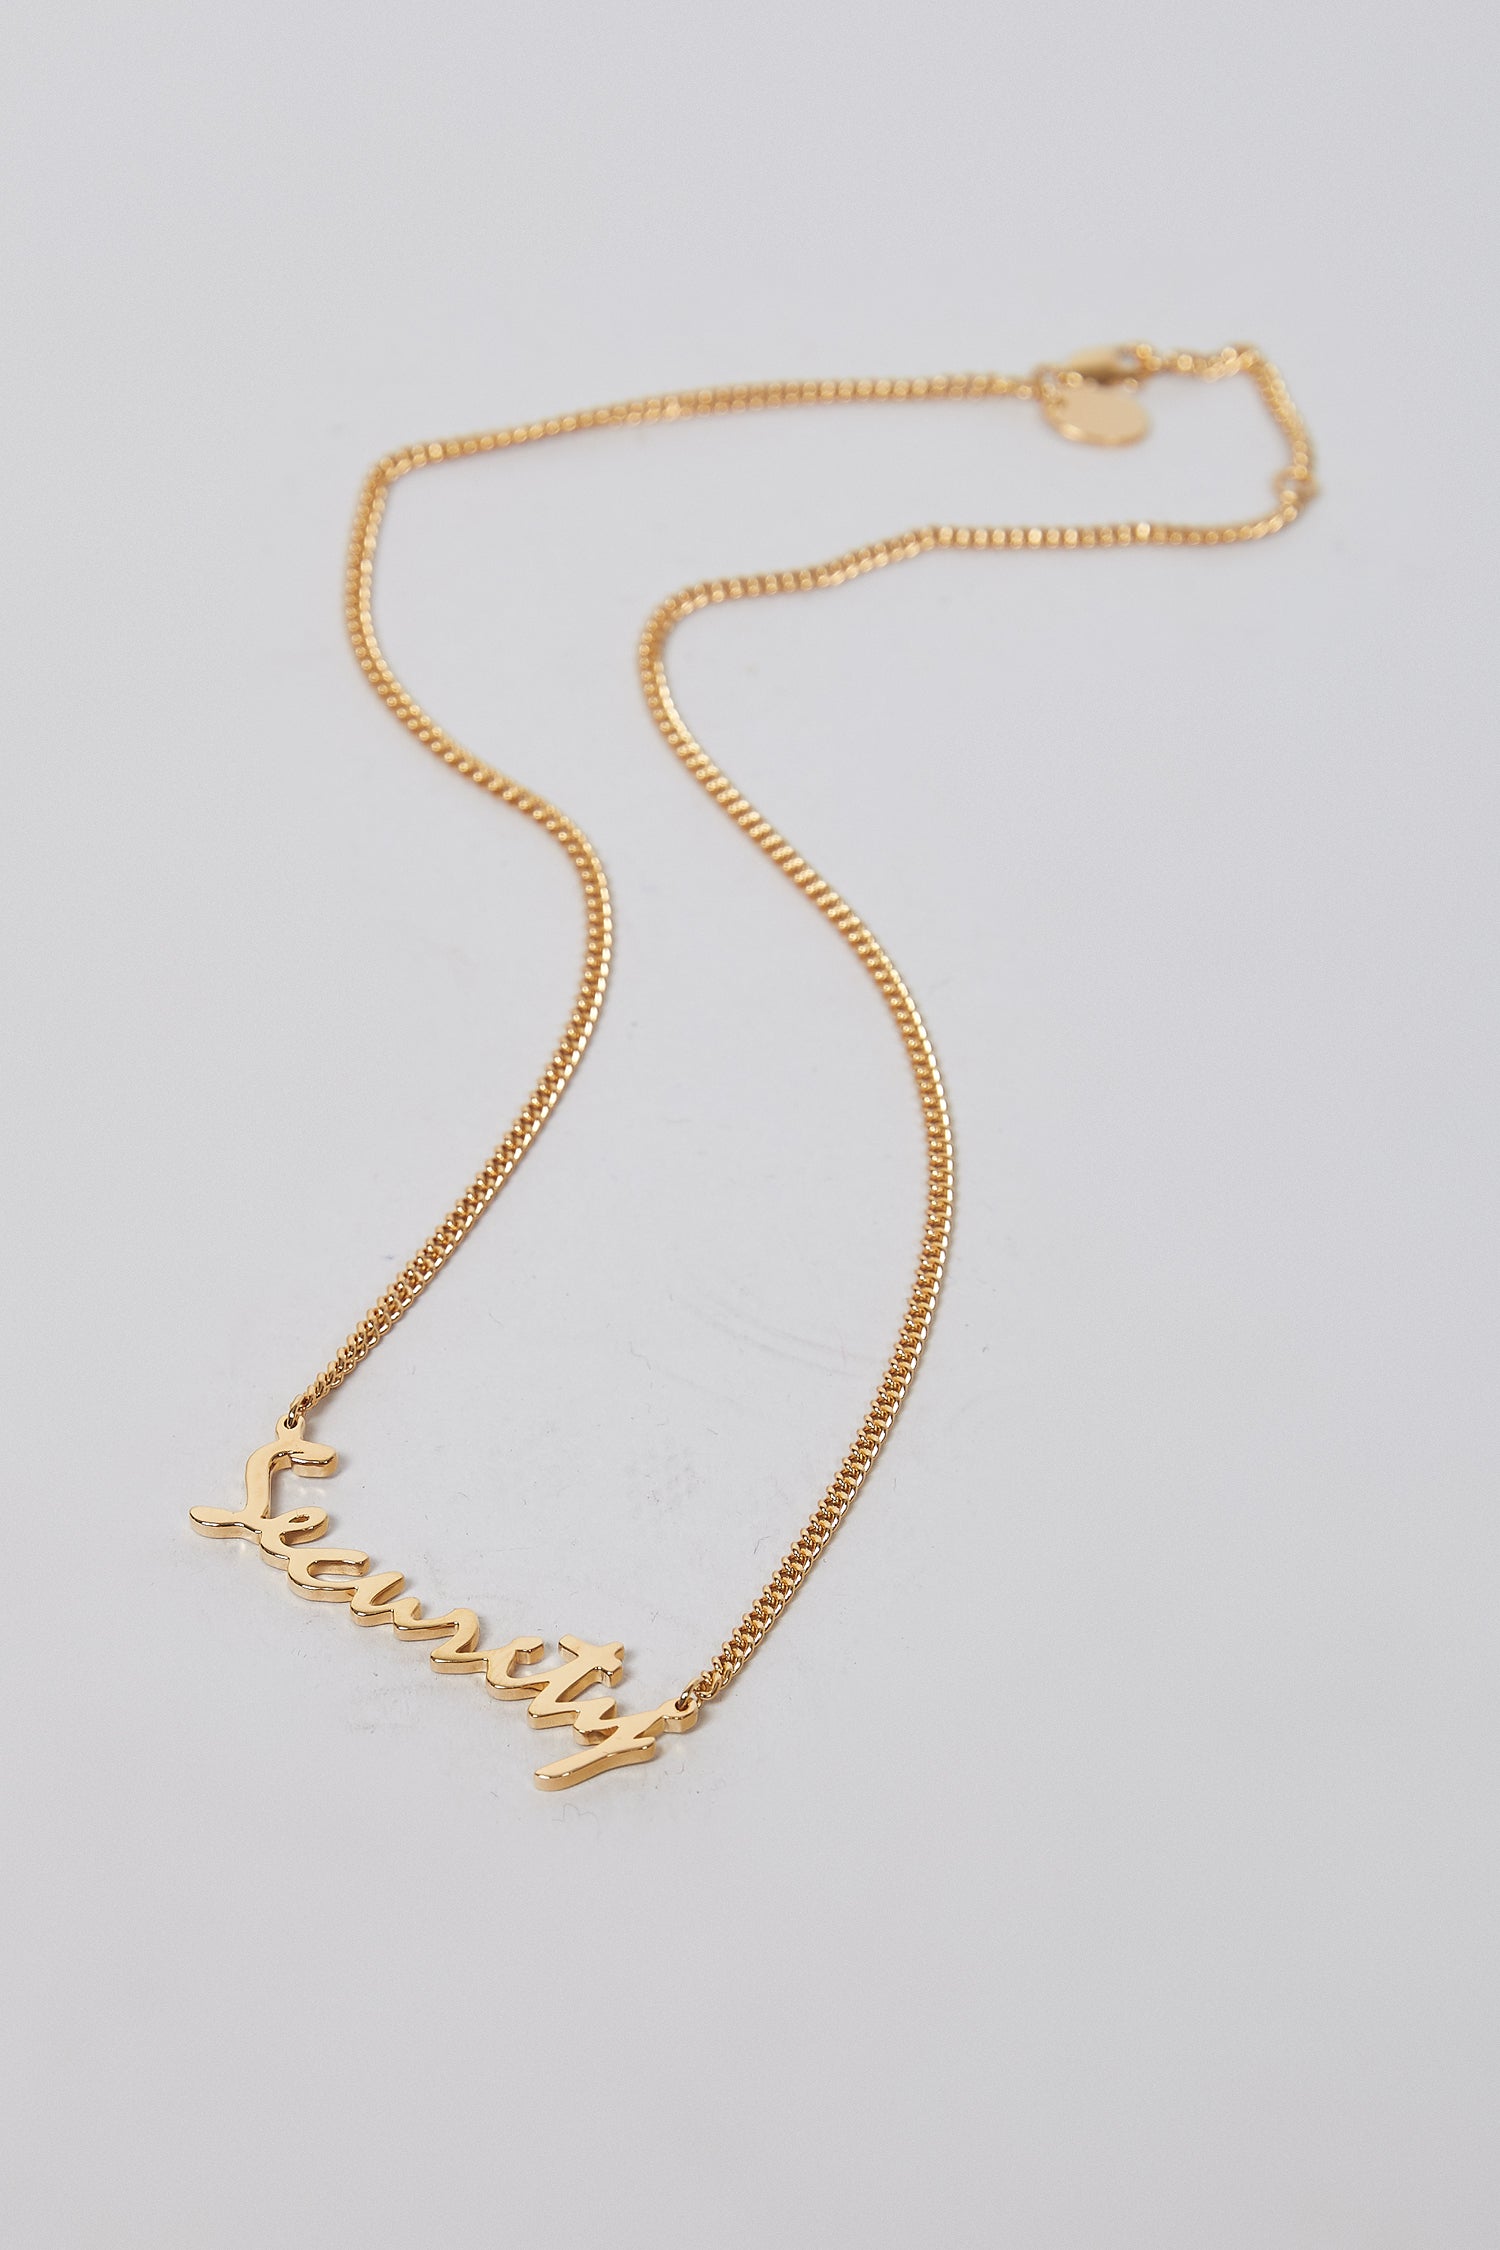 The SECURITY NECKLACE - GOLD  available online with global shipping, and in PAM Stores Melbourne and Sydney.